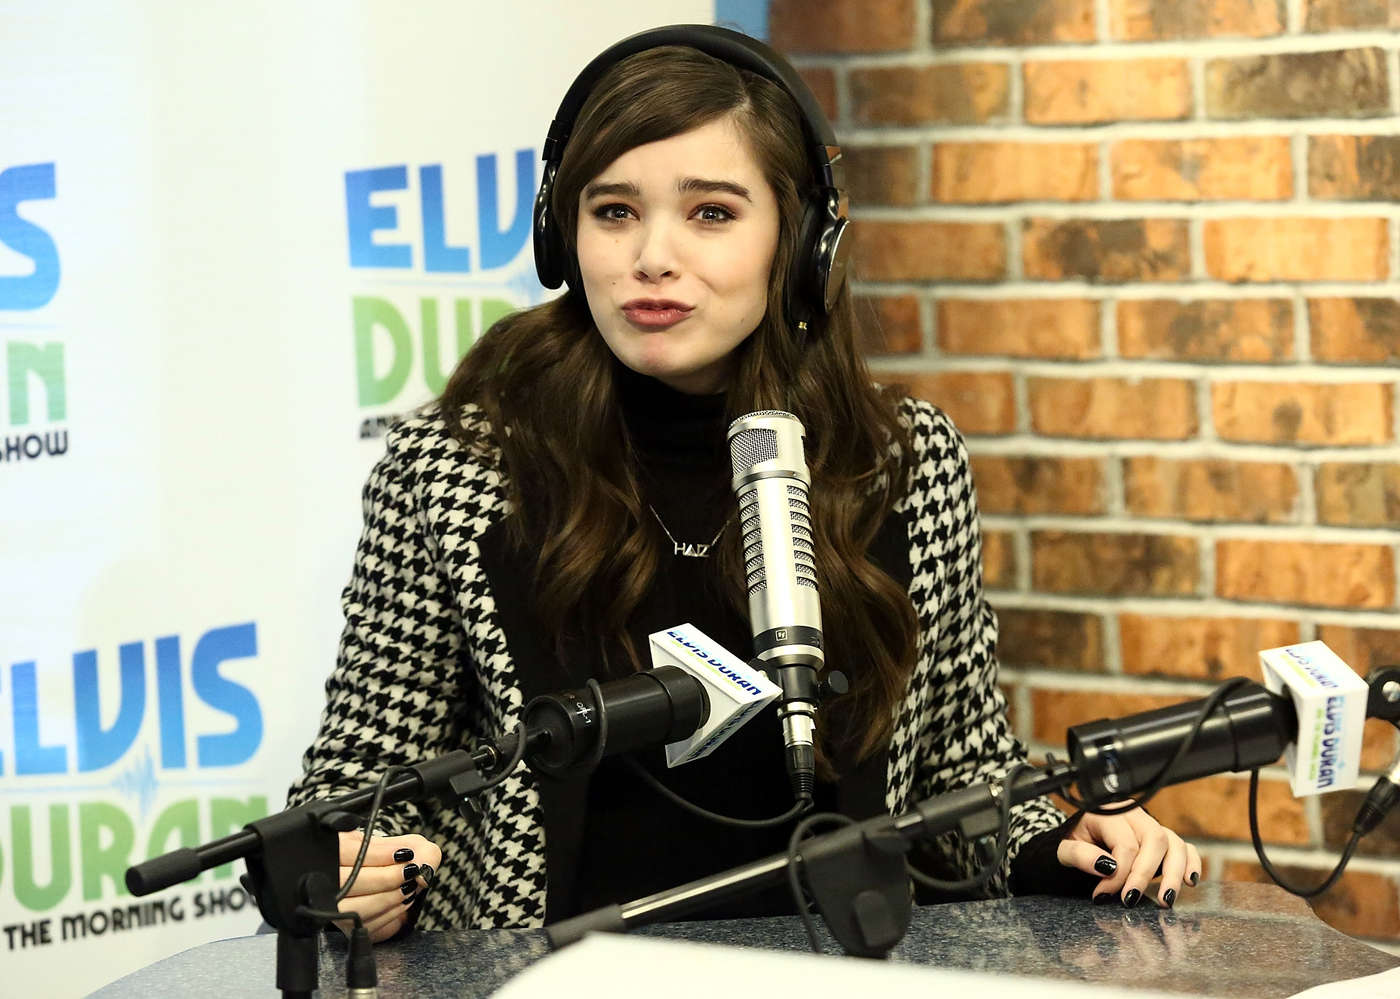 Hailee Steinfeld at The Elvis Duran Z100 Morning Show in NYC